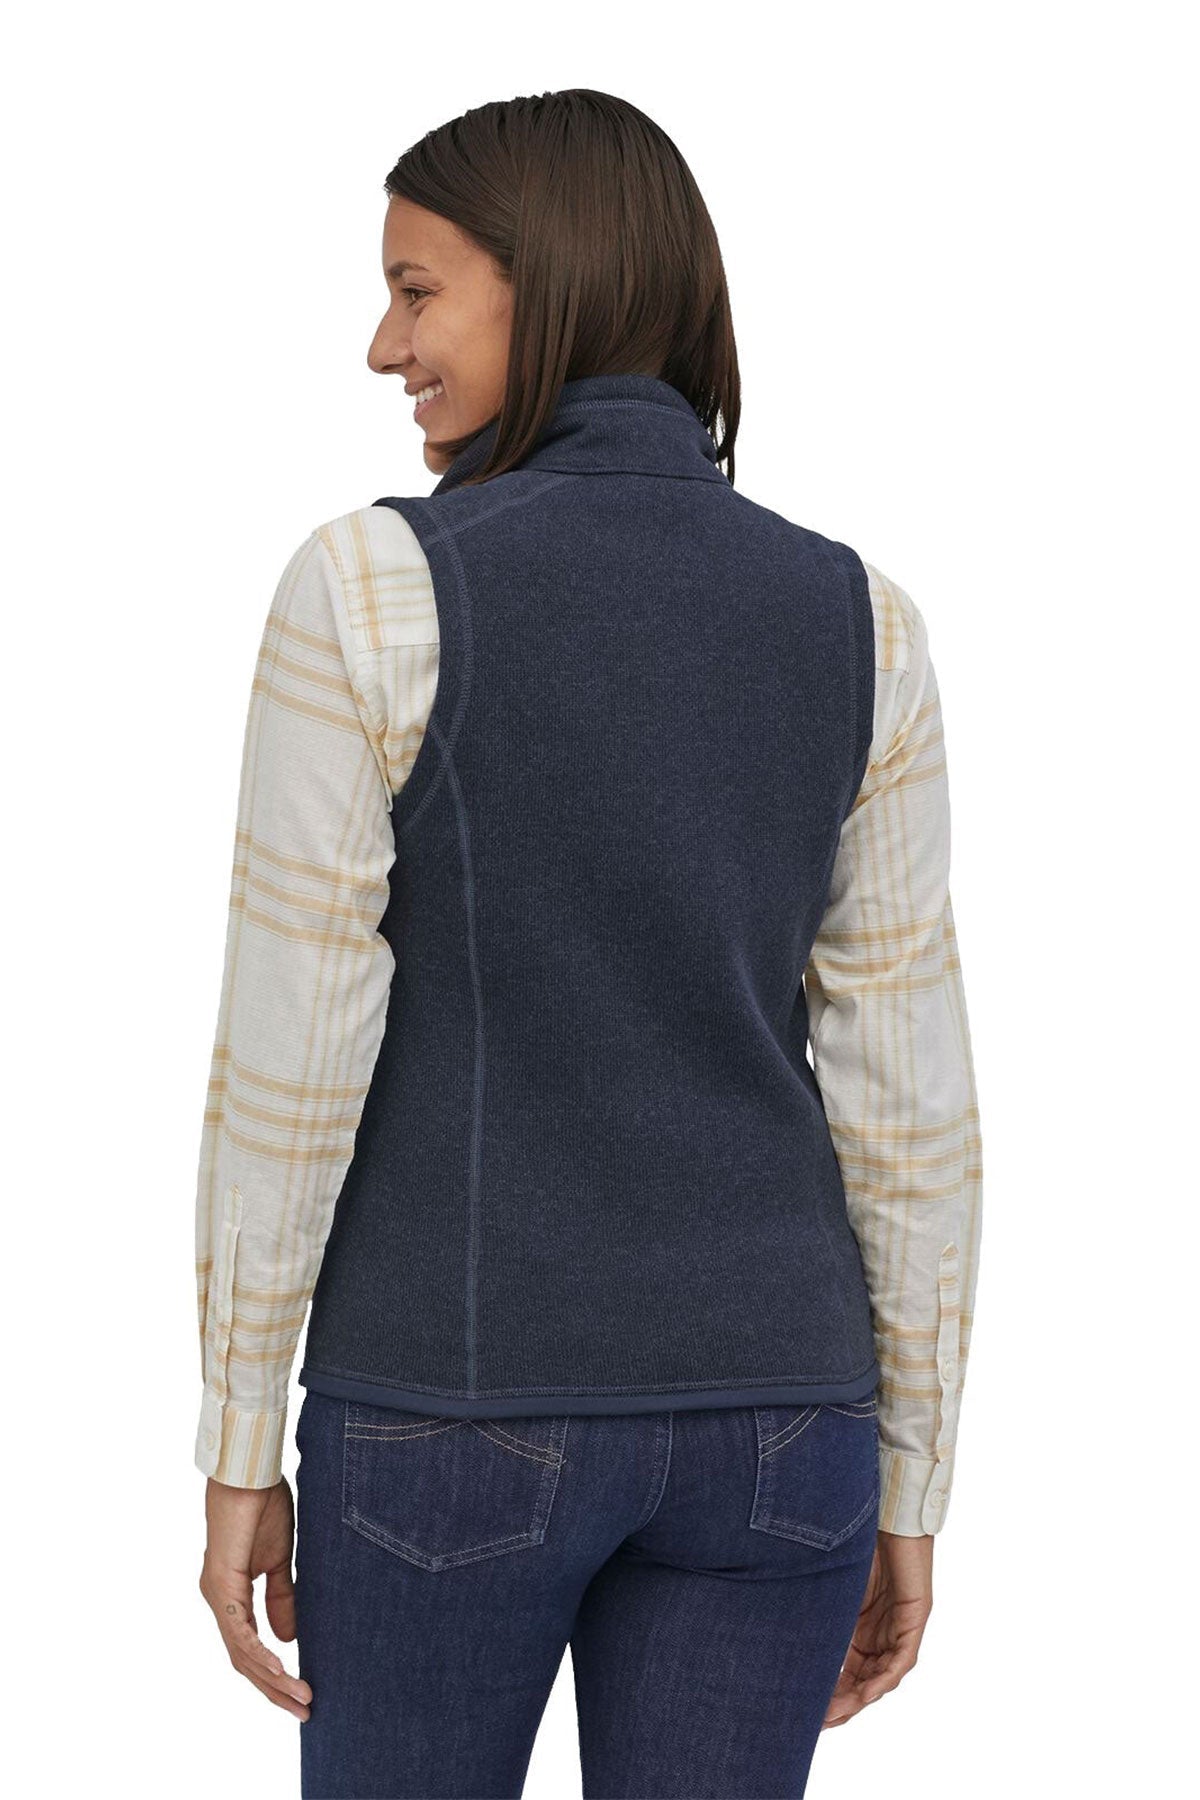 Patagonia Womens Better Sweater Fleece Customized Vests, New Navy